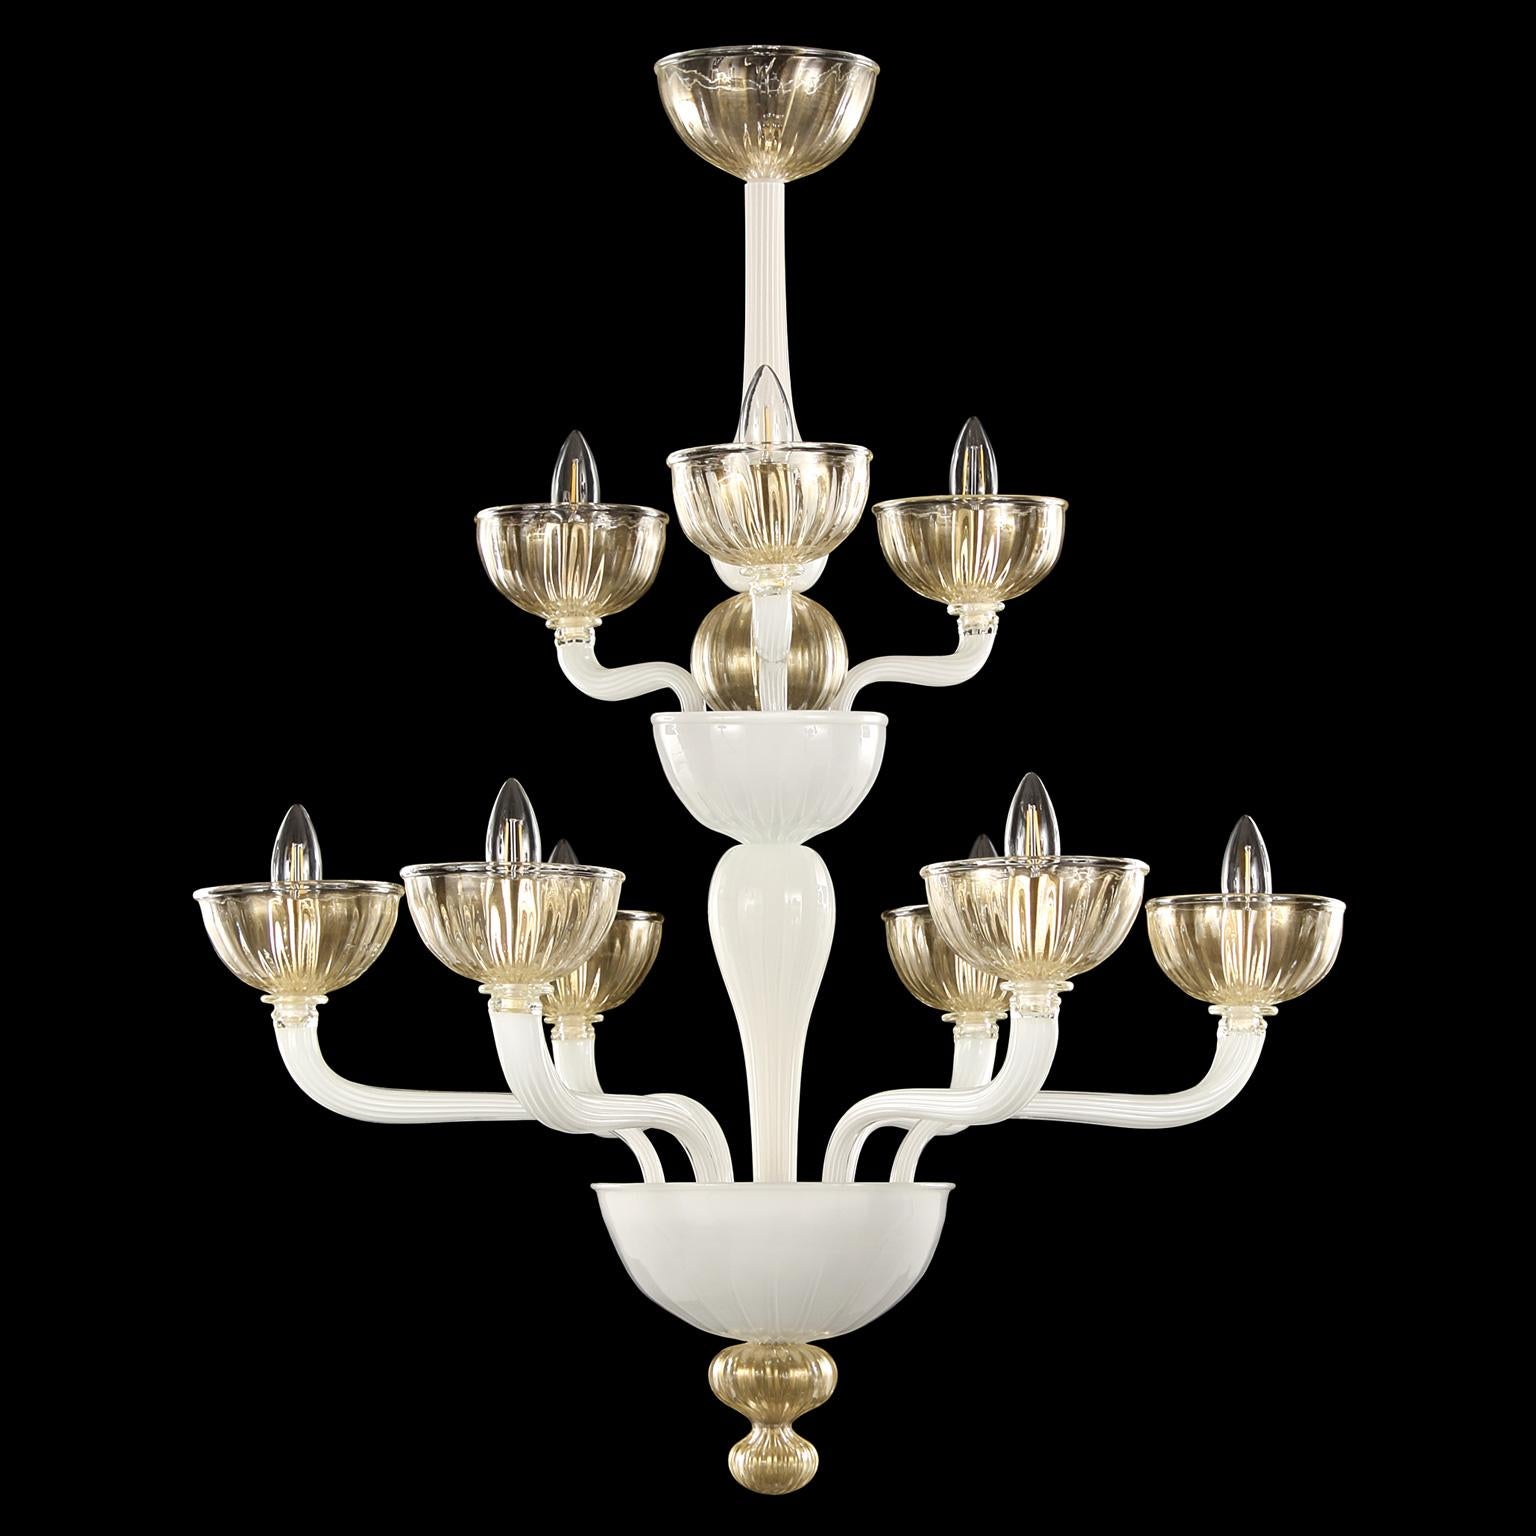 Edgar chandelier, 6+3 lights, double tier white encased rigadin Murano glass gold details by Multiforme
Edgar Murano glass chandelier is one of those chandeliers in our collections that stands out thanks to its harmonious and balanced shapes. We